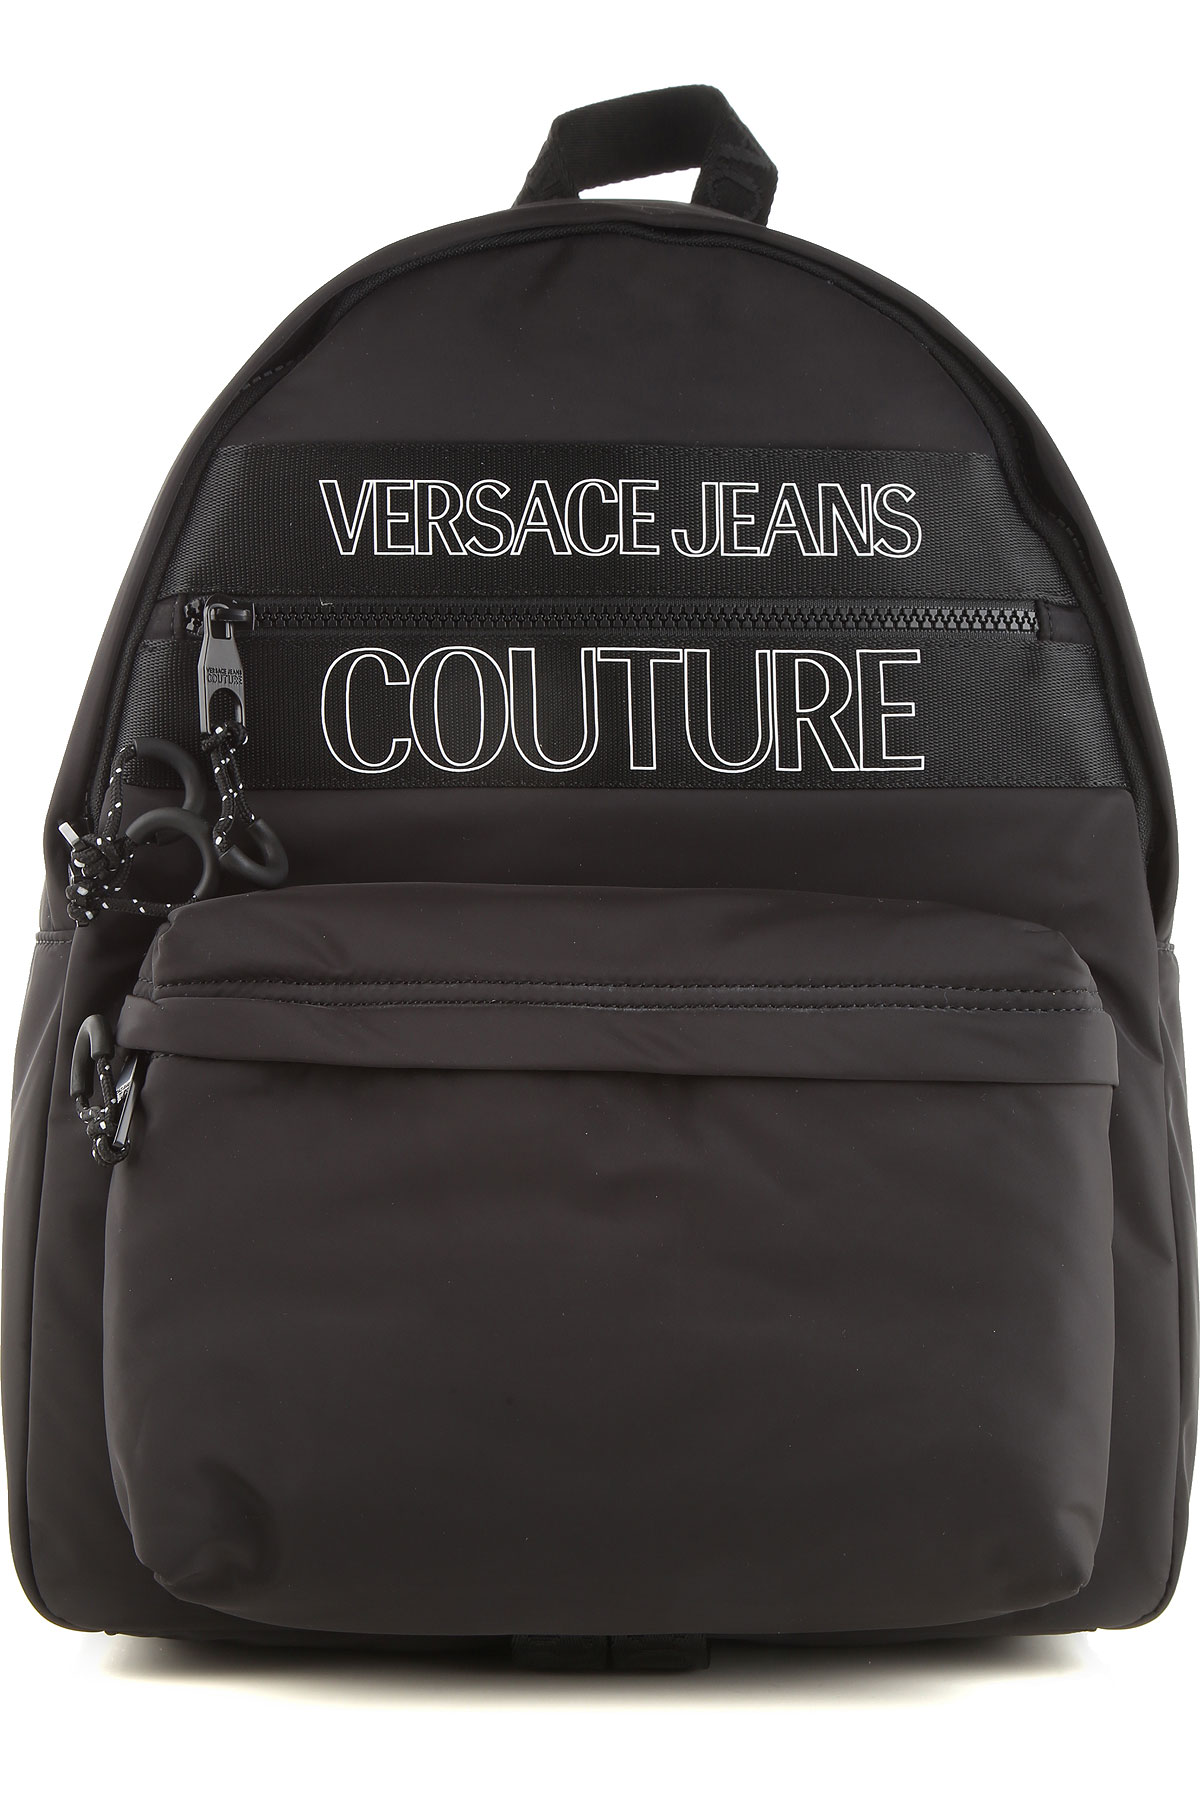 Briefcases Versace Jeans Couture , Style code: e1ywaba1-71895-899